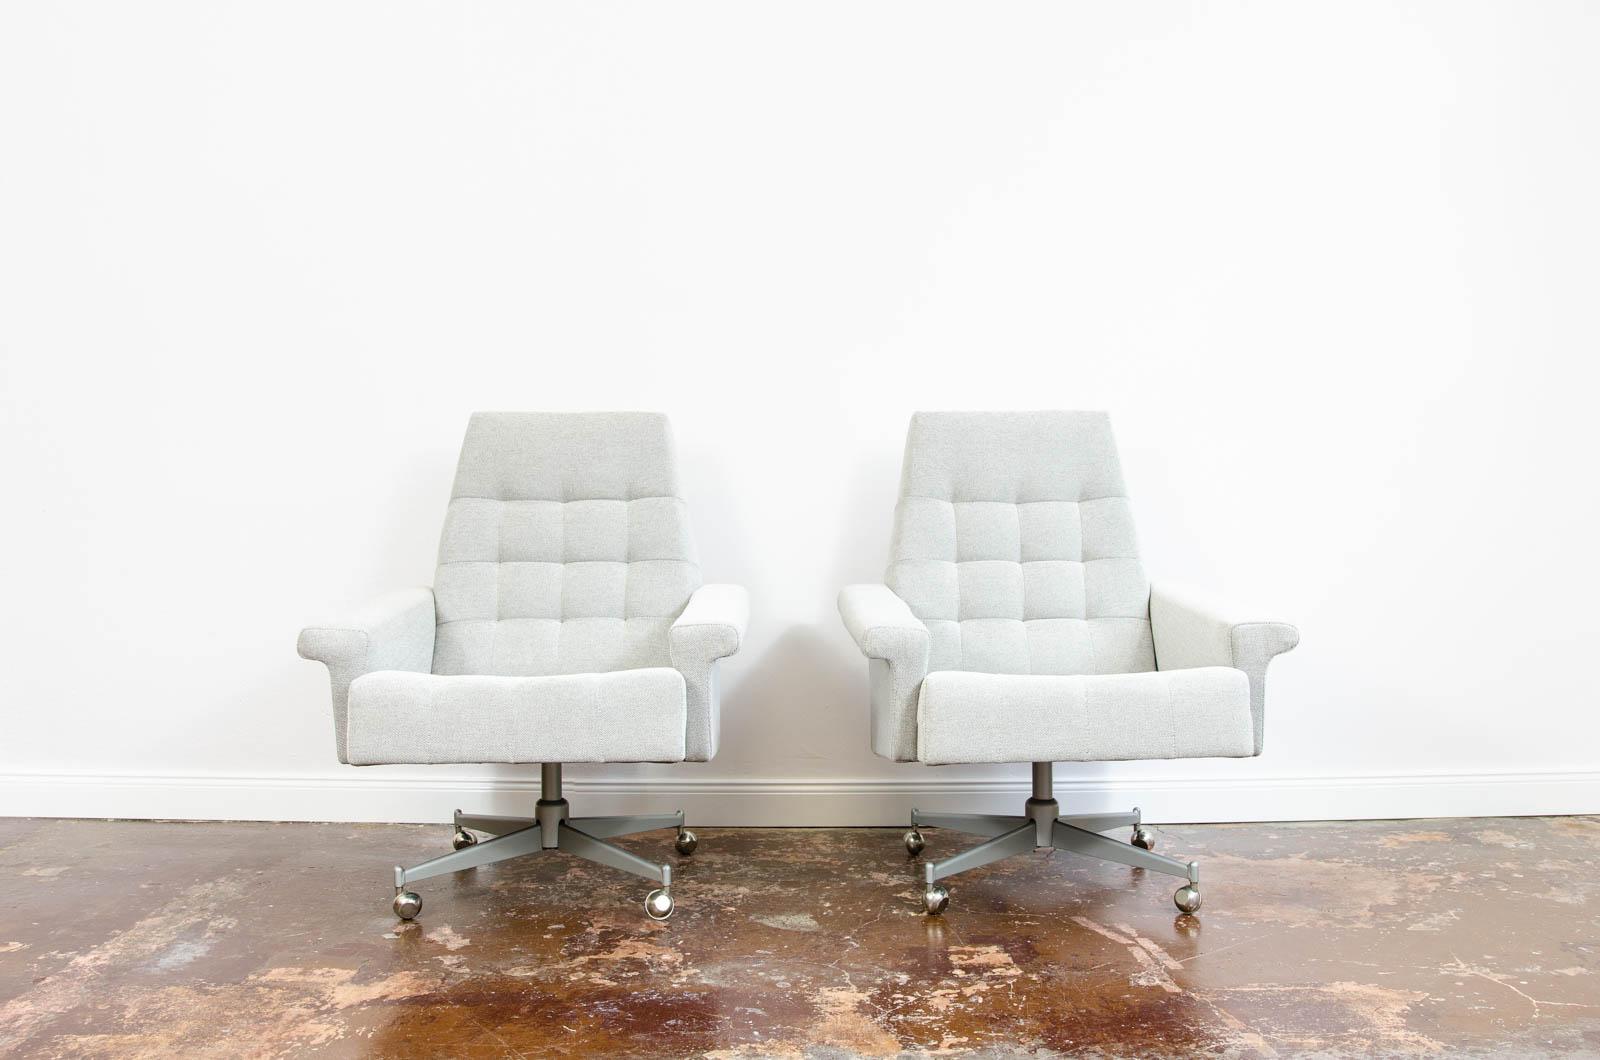 Pair of Vintage armchairs from UP Závody on Metal Wheels, Czechoslovakia, 1970

Fully reupholstered chairs in white - grey waterproof fabric. Seat and backrest area with quilting.
Chairs rests on metal star base, on wheels.